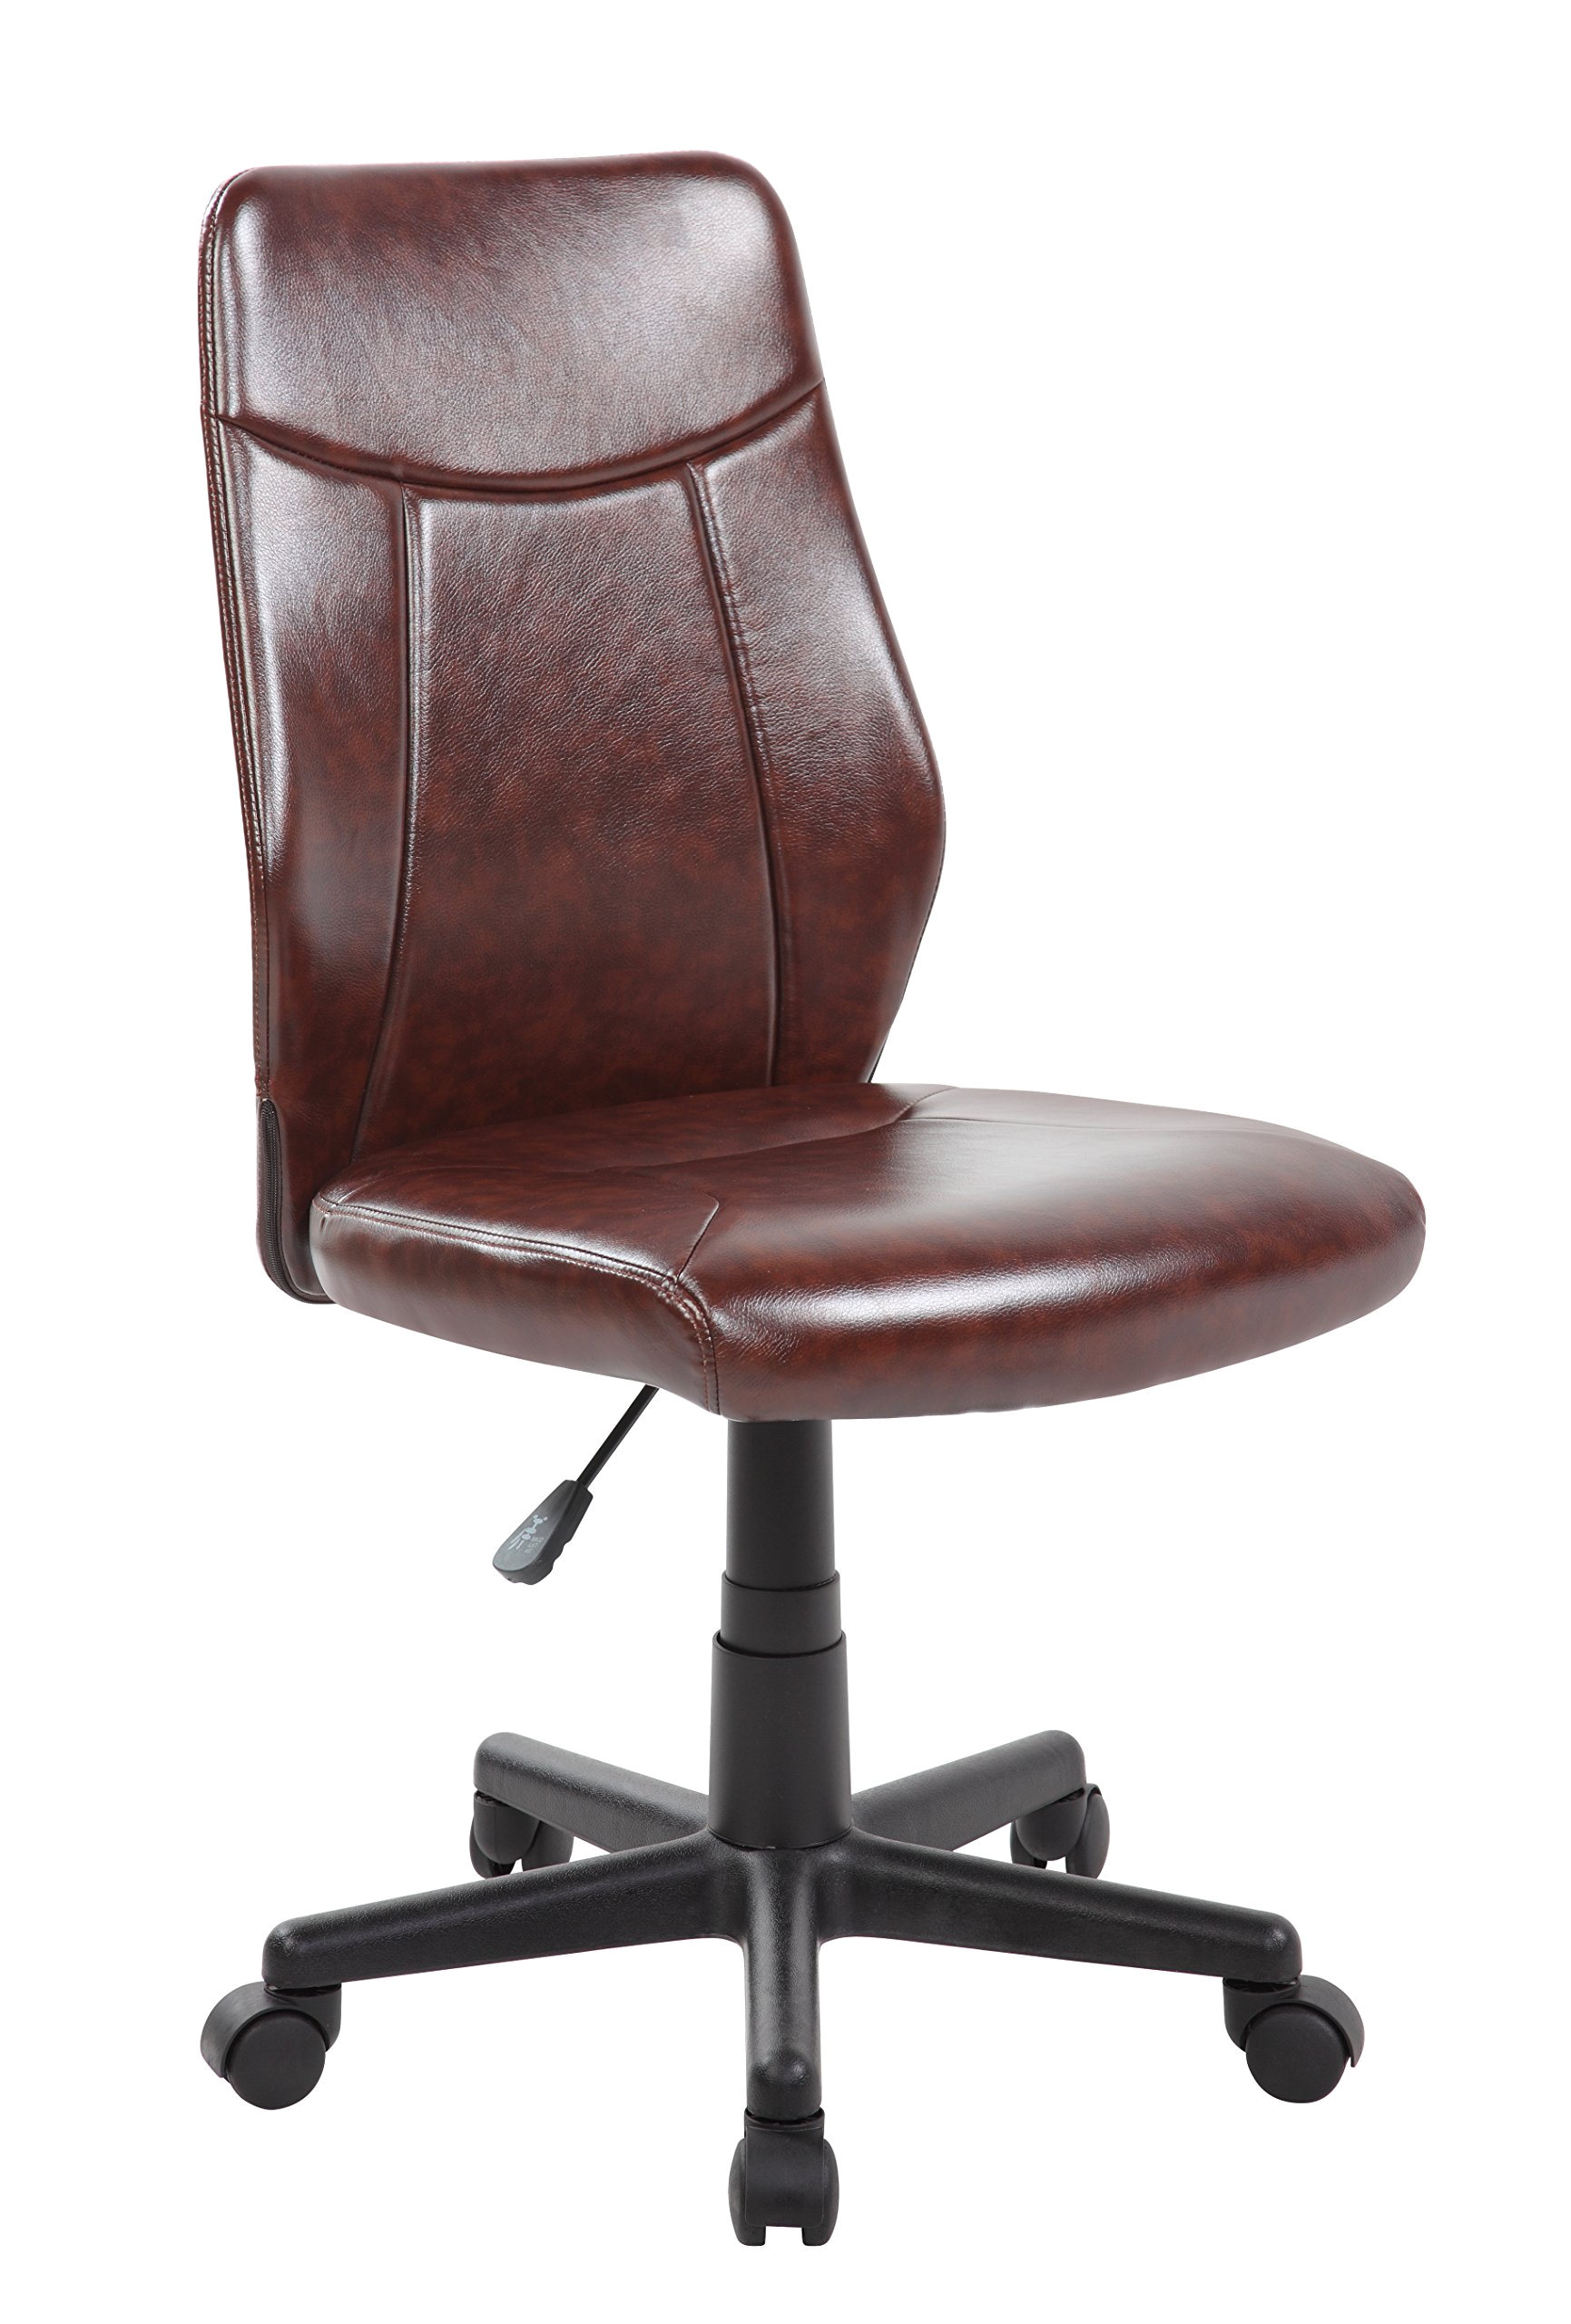 armless leather office chairs white office chair sale